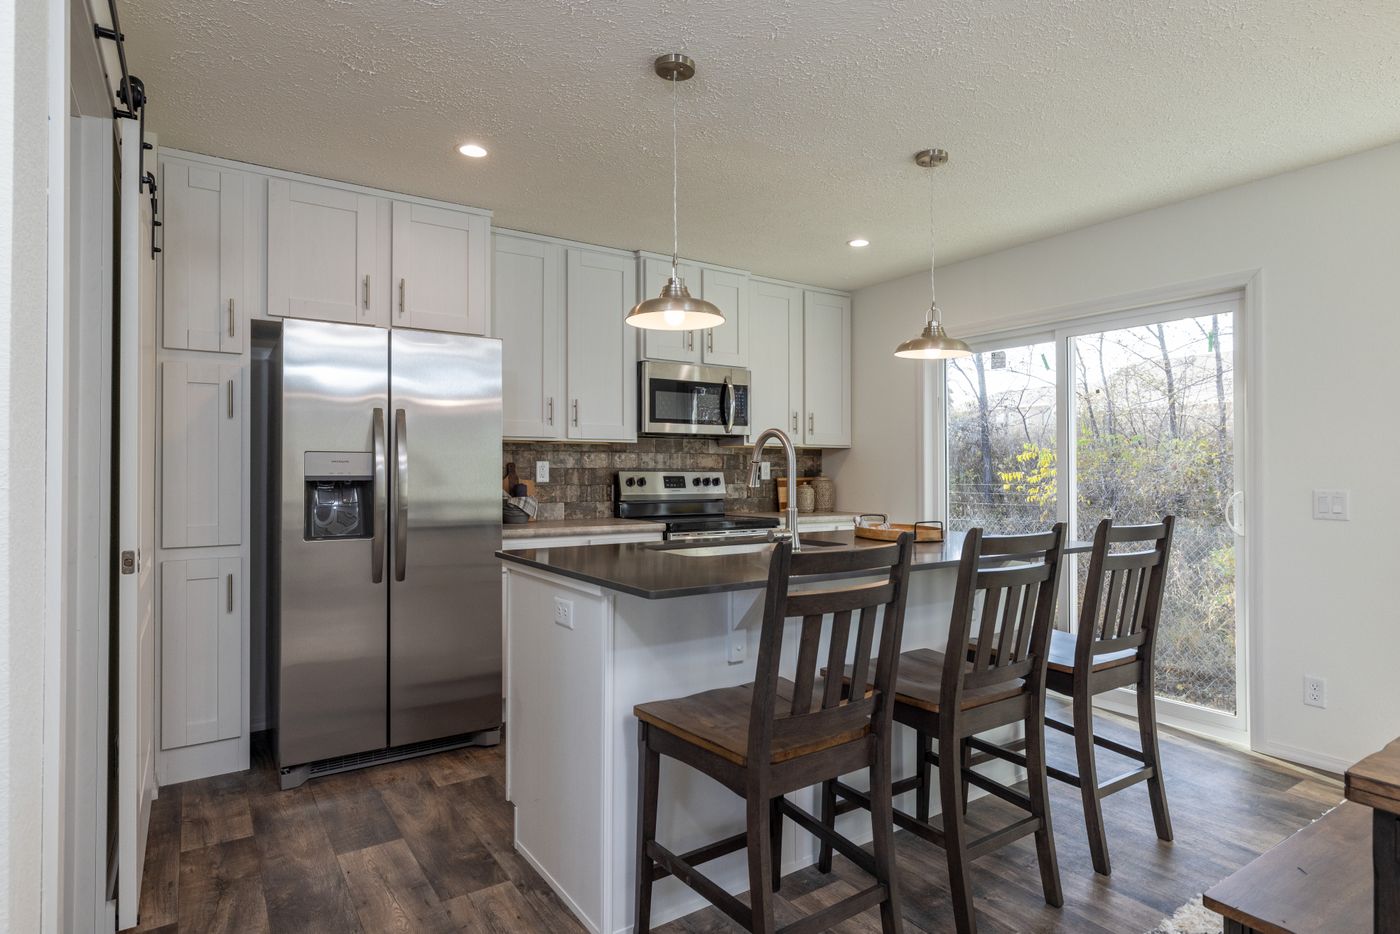 The THE WASHINGTON MOD Kitchen. This Modular Home features 3 bedrooms and 2 baths.